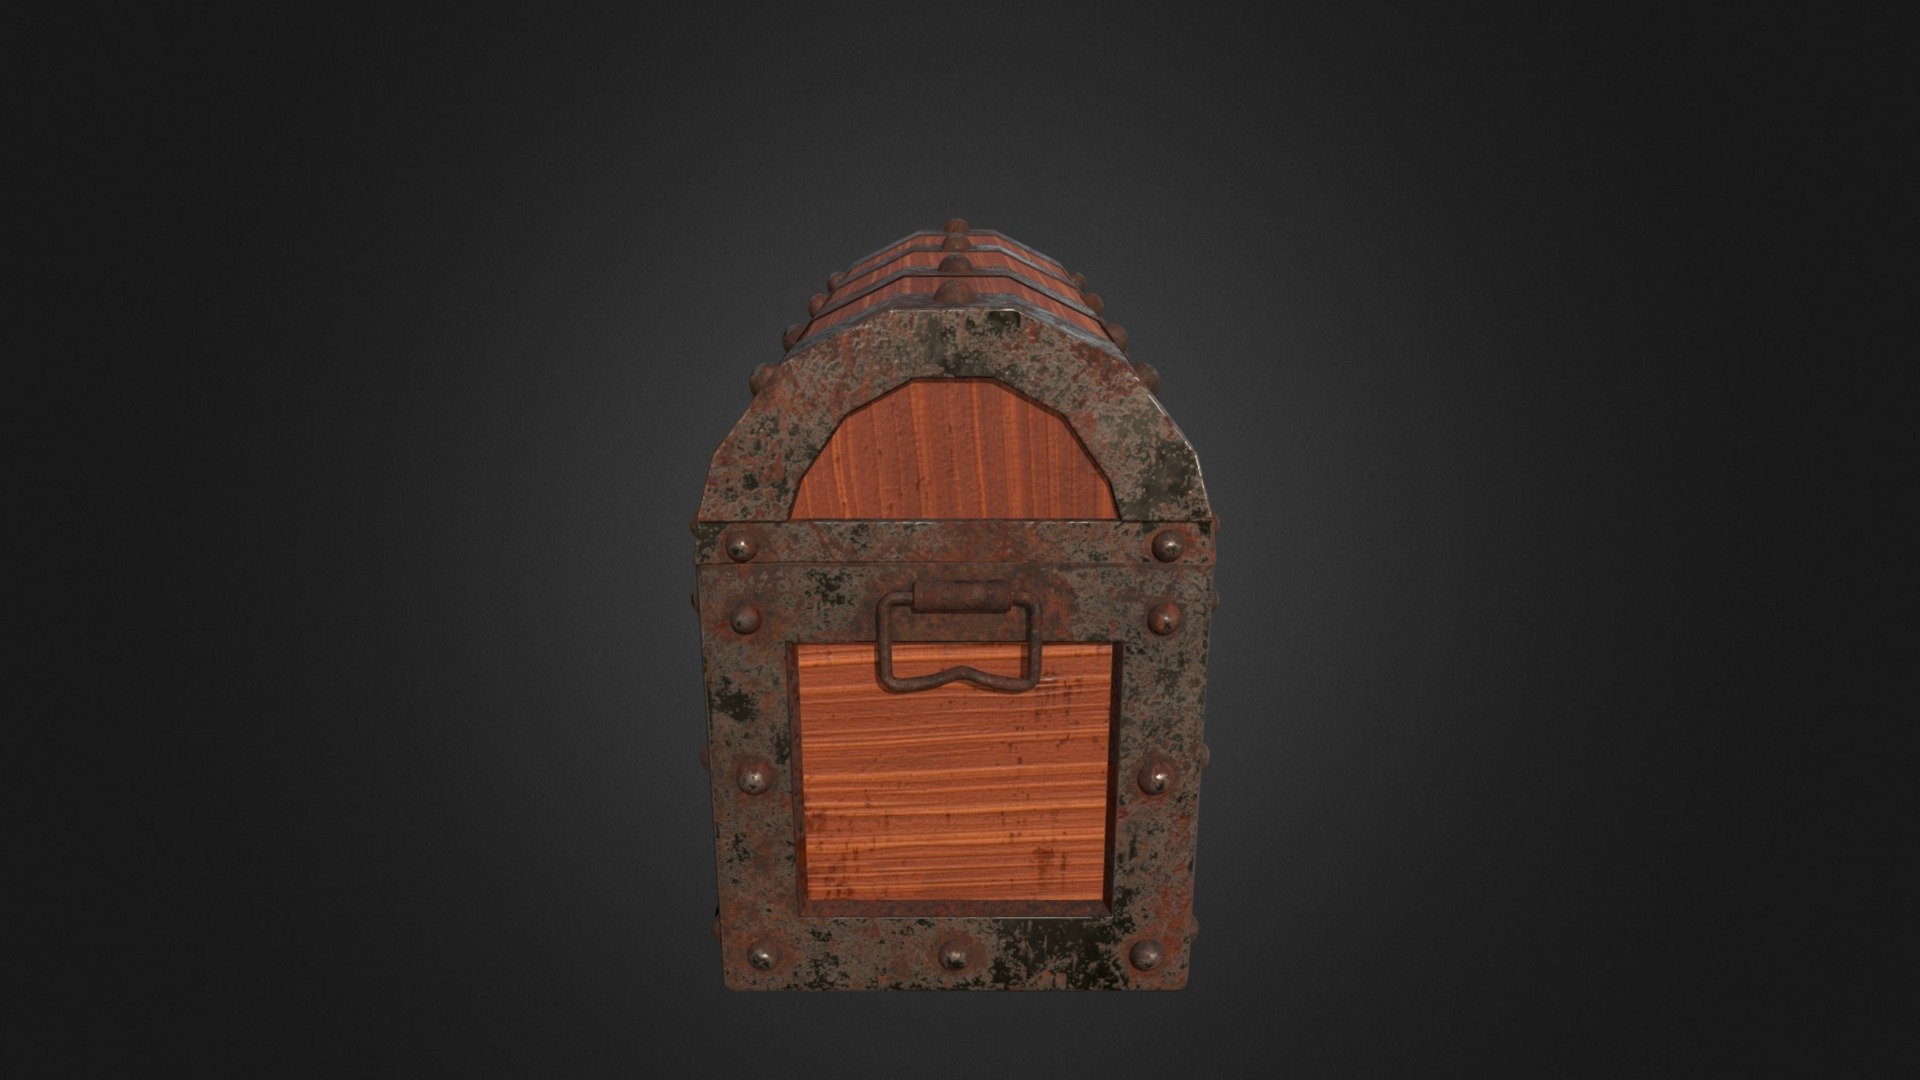 Old Treasure box 3D Model made in Autodesk Maya and Texture in substance 3d painter,
vintage product Model - Treasure Box 3d Model in Maya - 3D model by adithyasanil 3d model